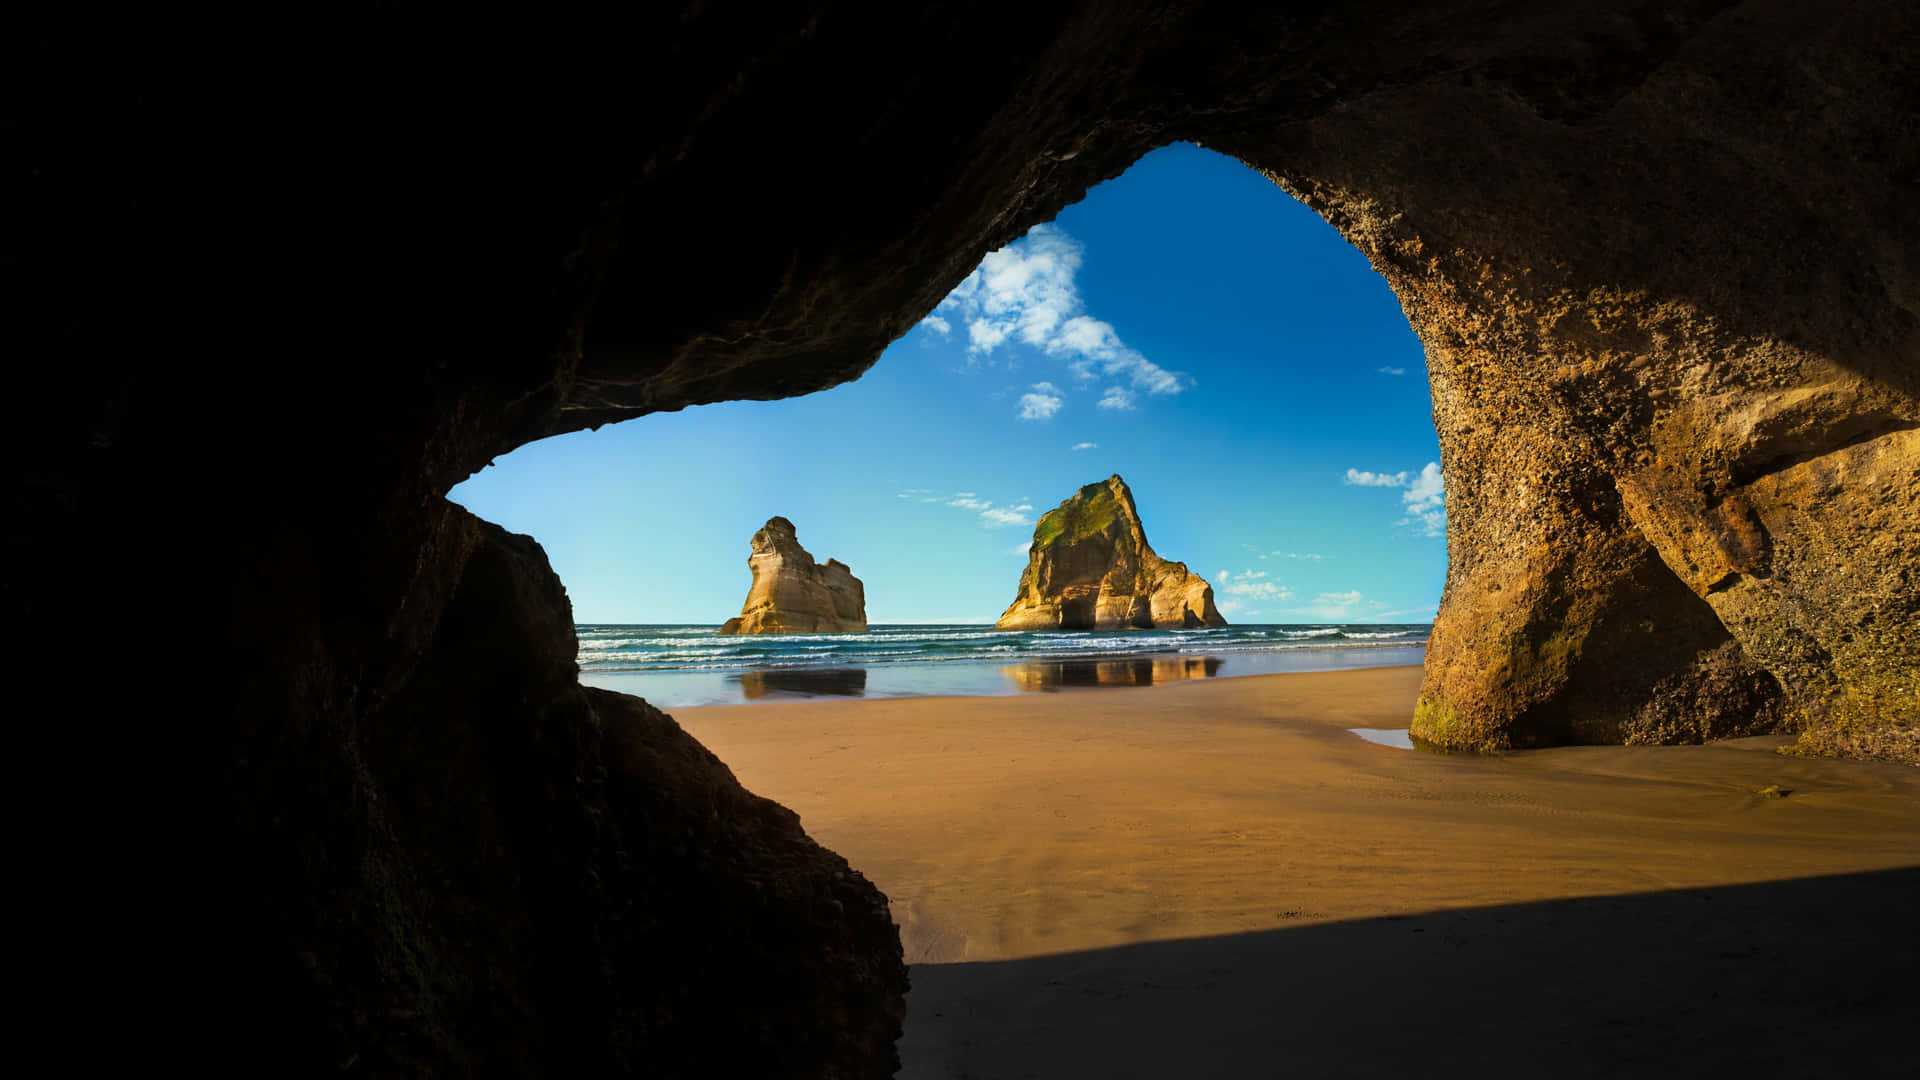 A View Of A Beach From A Cave